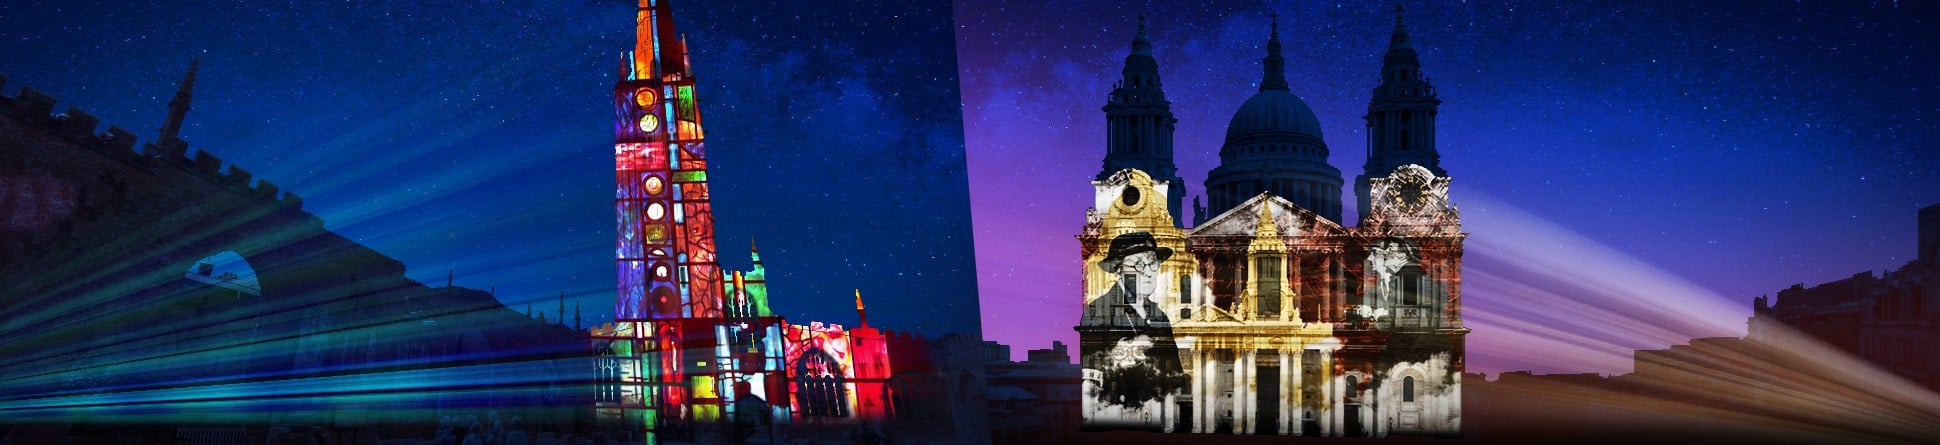 Artist's impression of light projections on Coventry Cathedral and St Paul's Cathedral